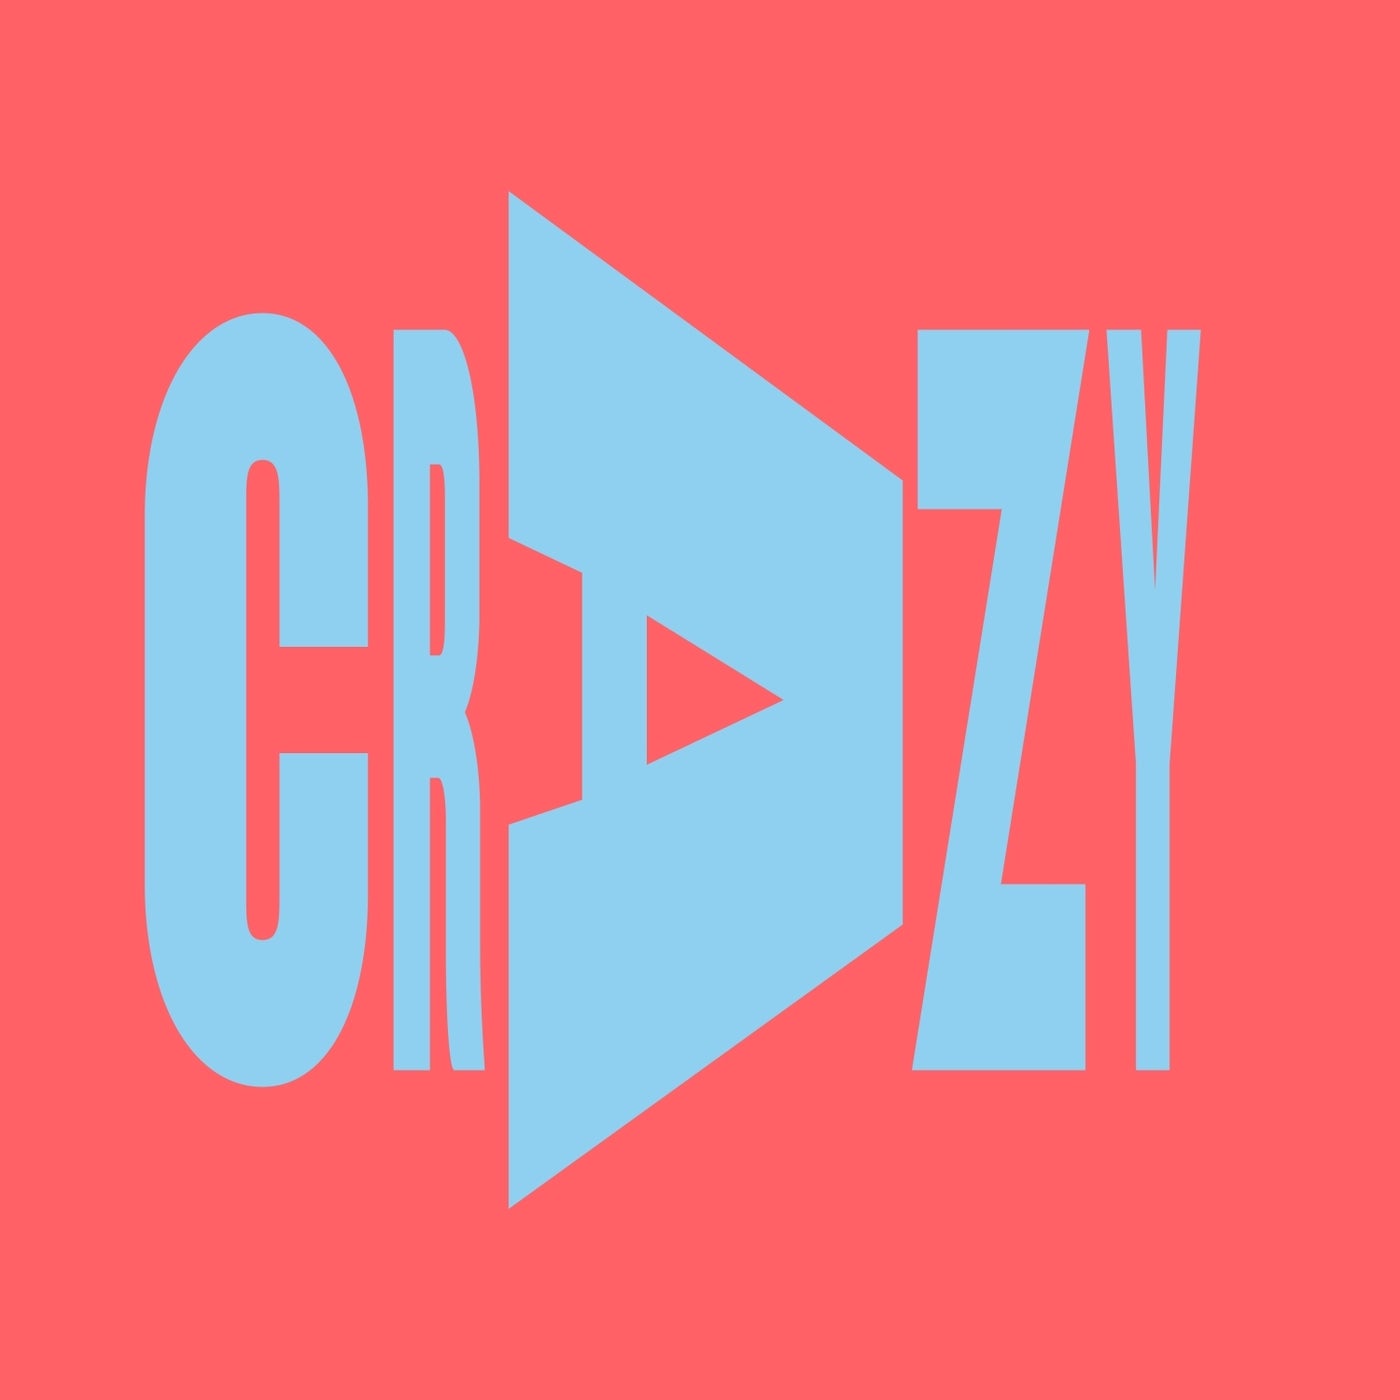 Release Cover: Crazy Download Free on Electrobuzz